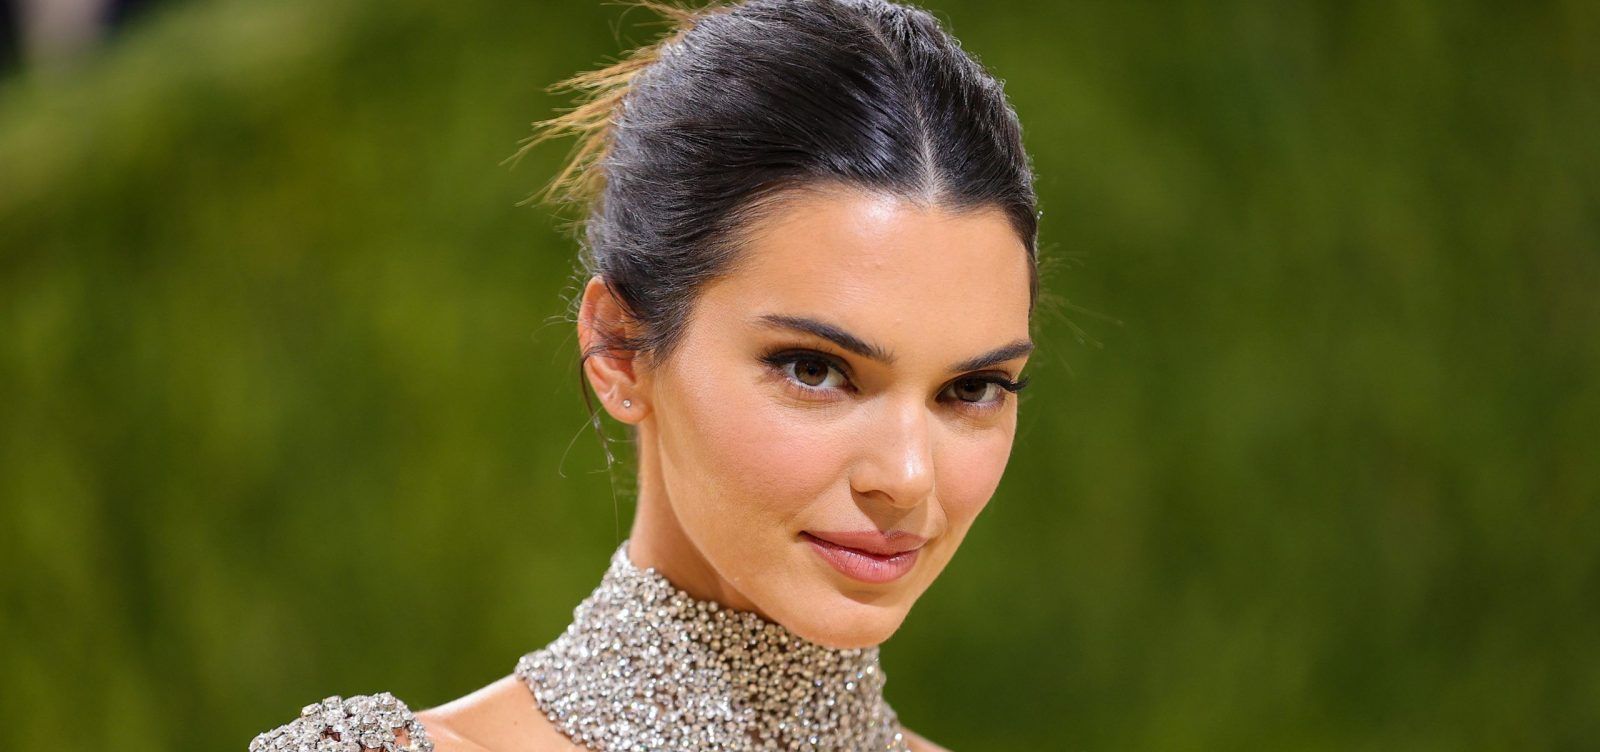 The 'clean girl' trend: How to achieve the perfect sleek bun style